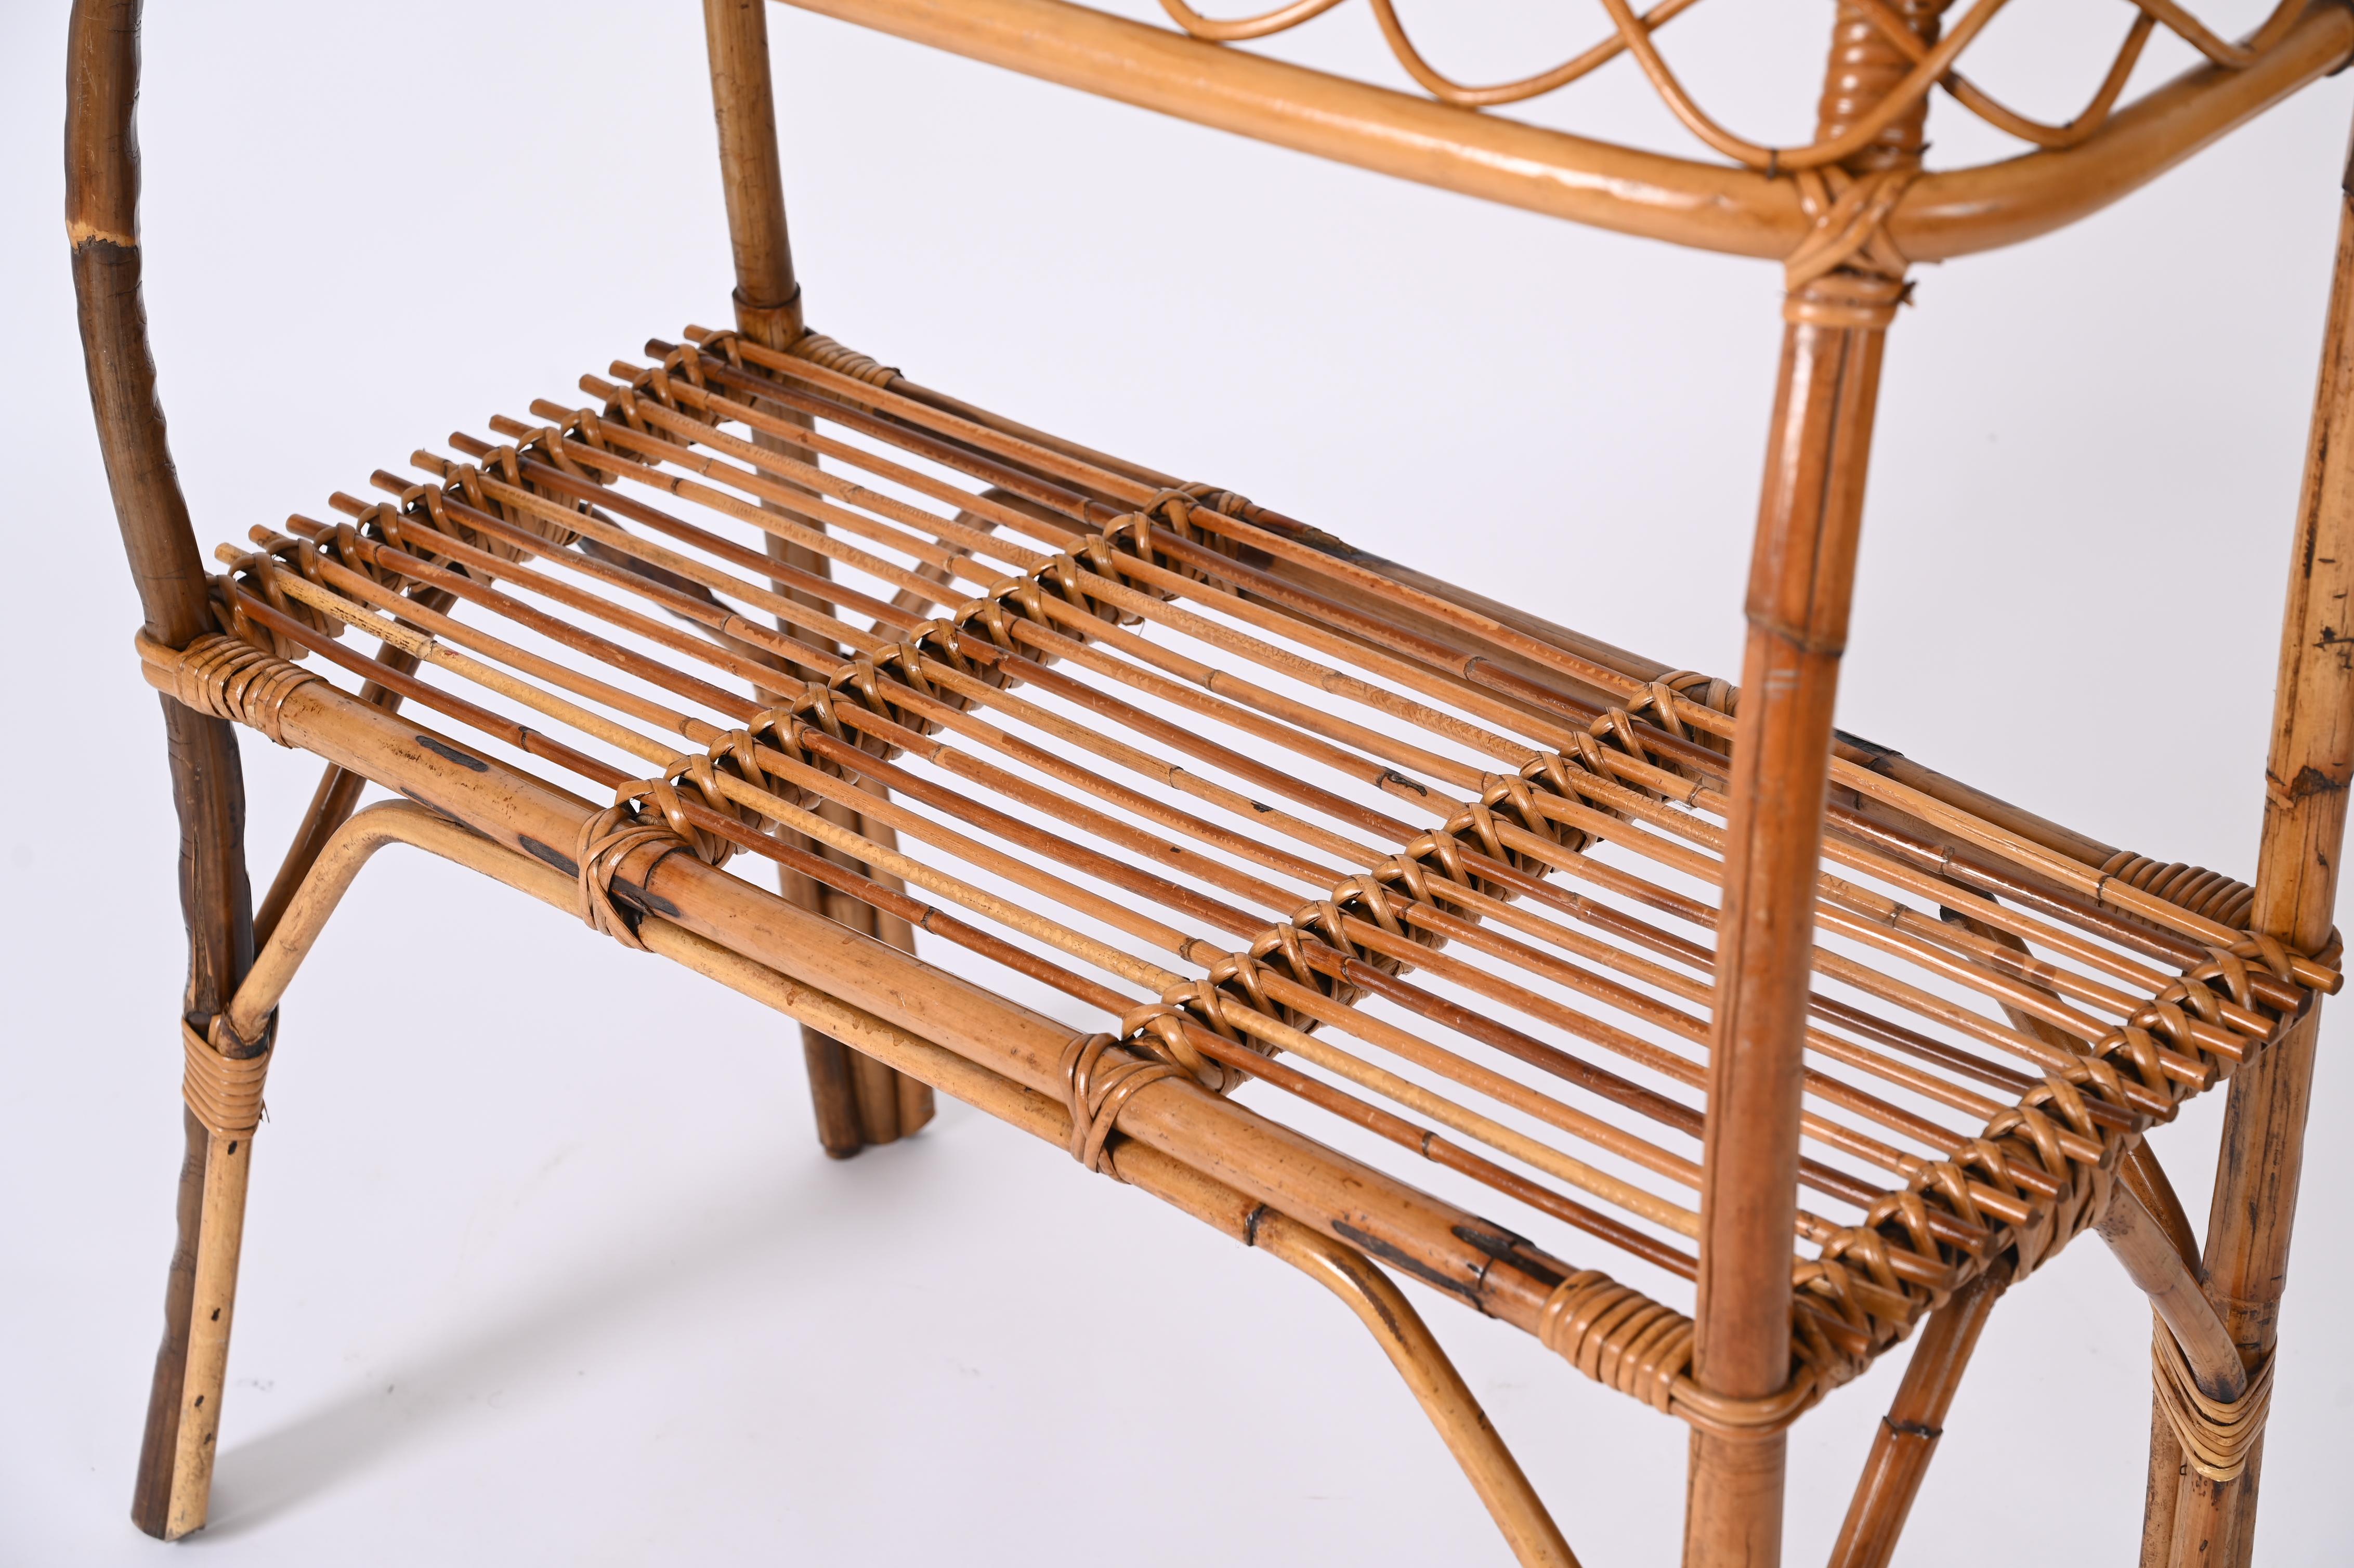 Midcentury Bamboo and Rattan Cocktail Console Table after Franco Albini, 1960s For Sale 6